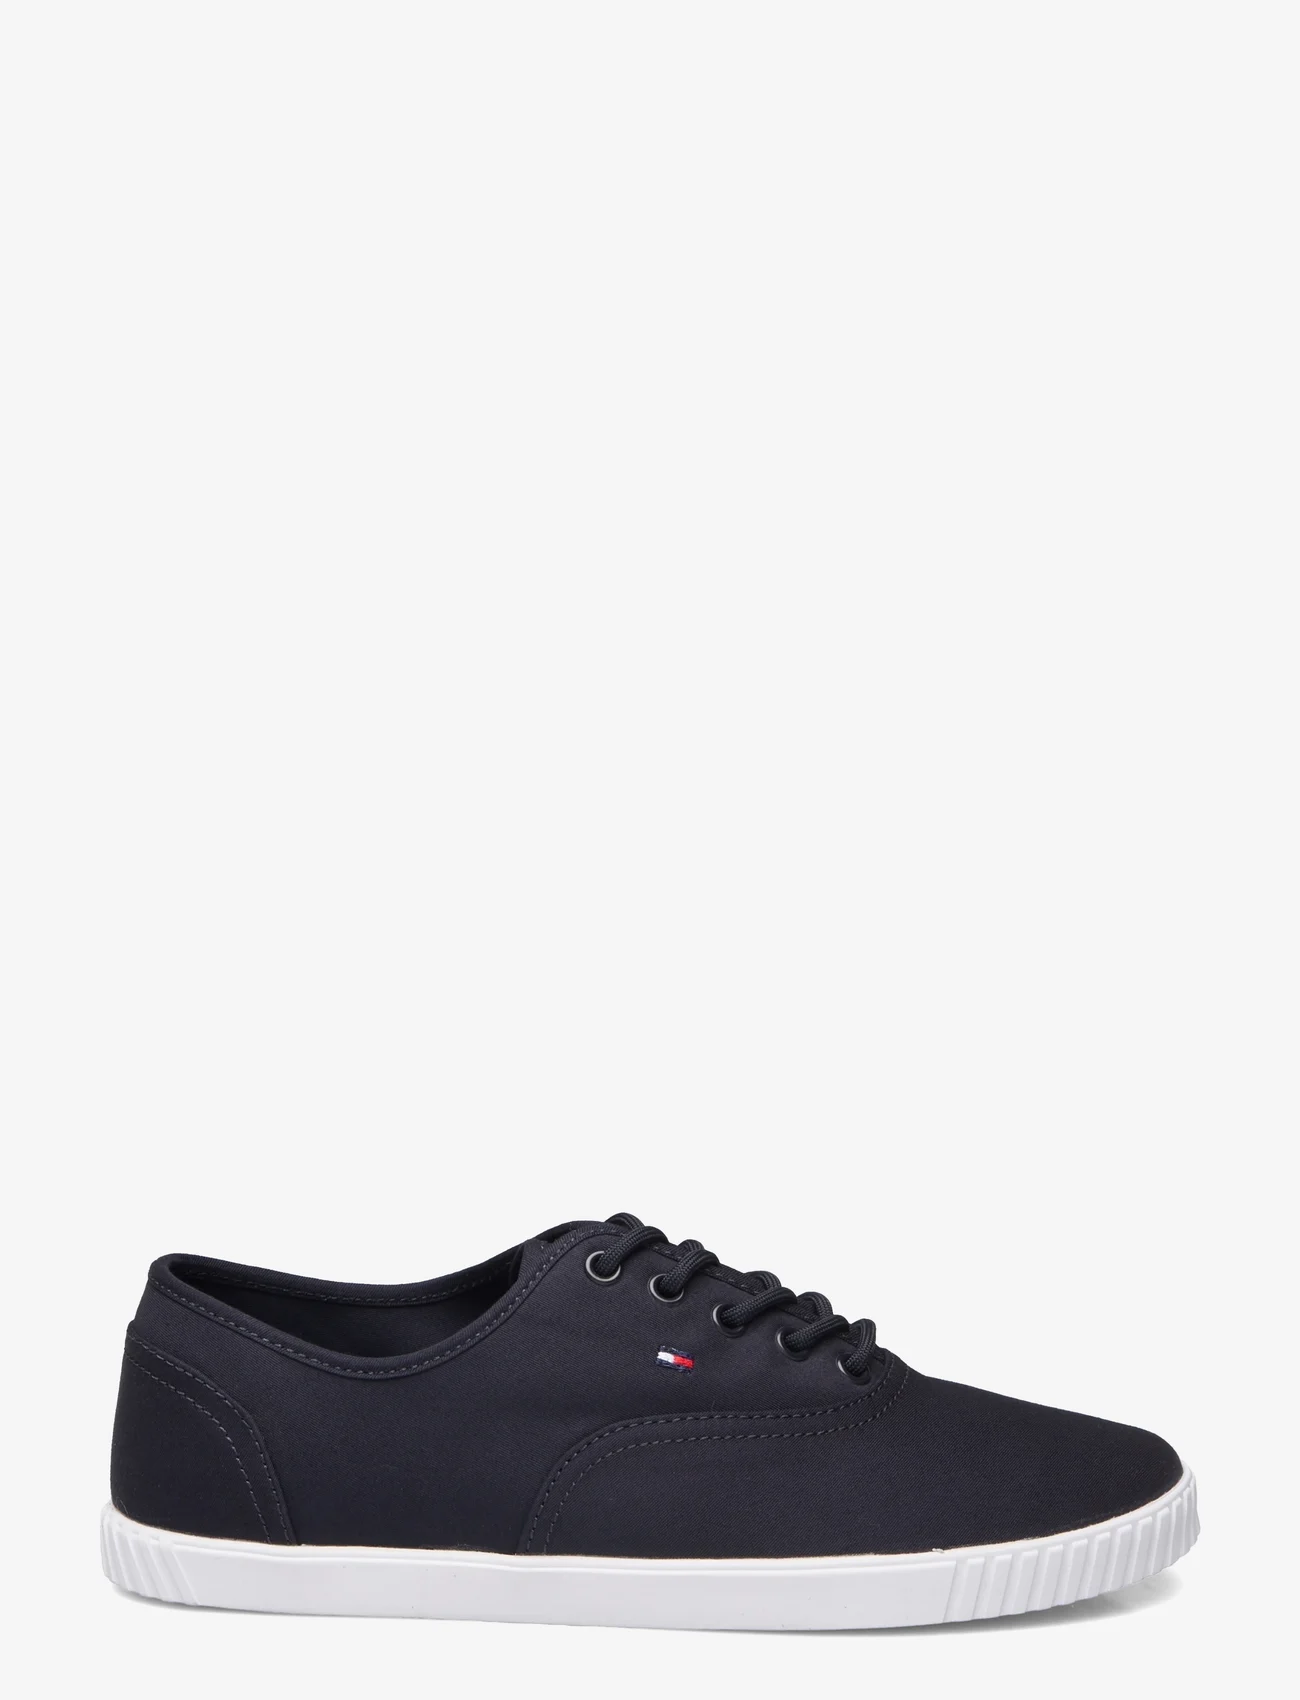 Tommy Hilfiger - CANVAS LACE UP SNEAKER - tenisówki - space blue - 1